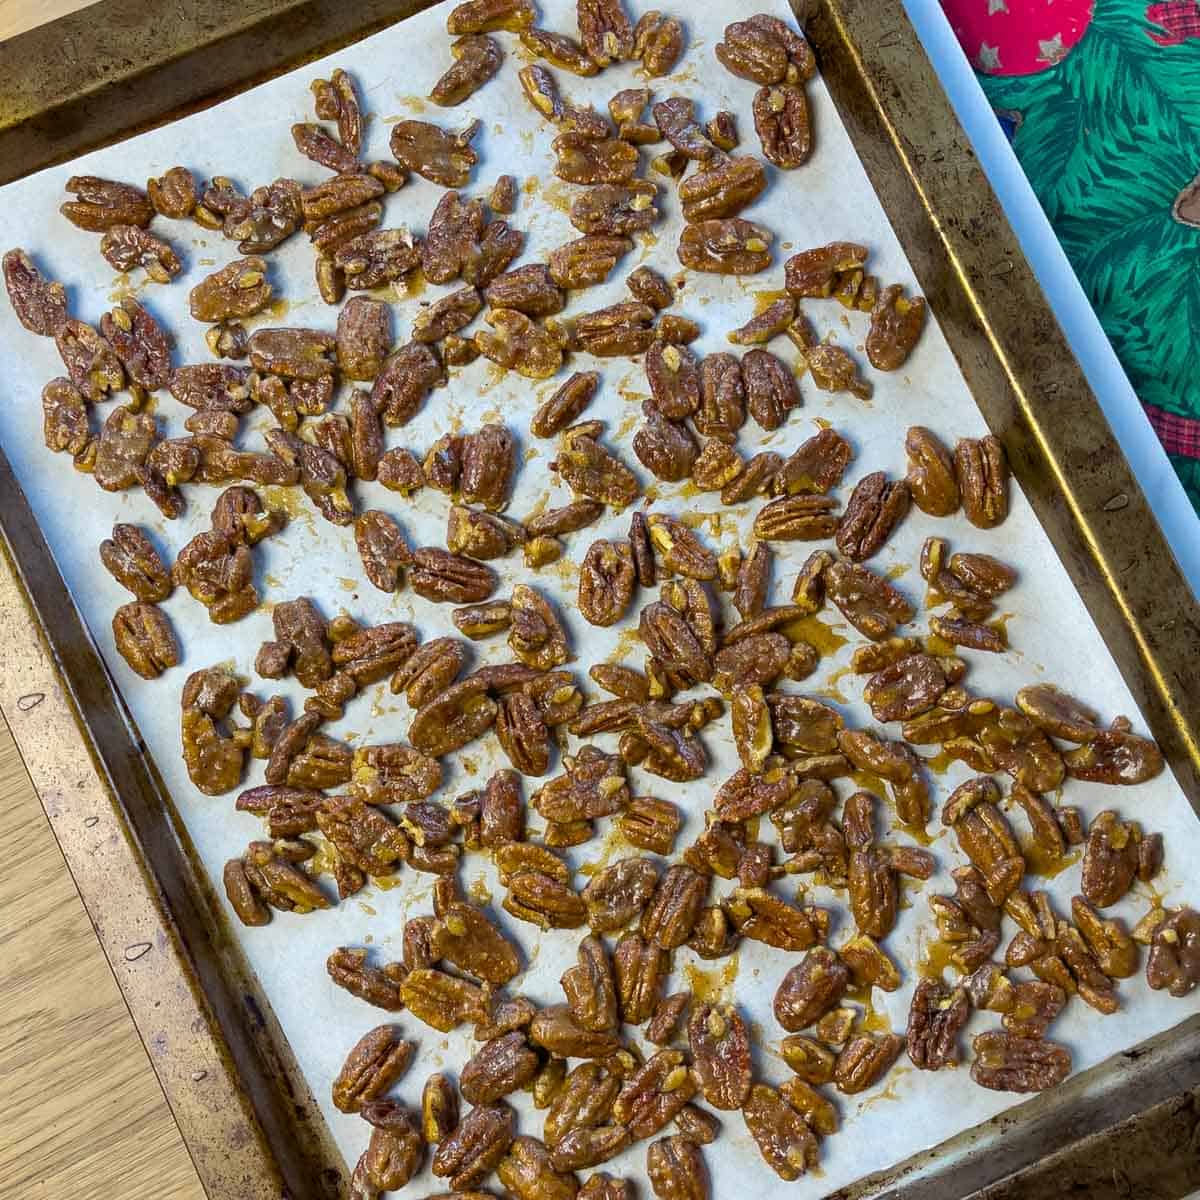 Spice coated pecans spread on a parchment lined baking sheet ready to go into the oven.